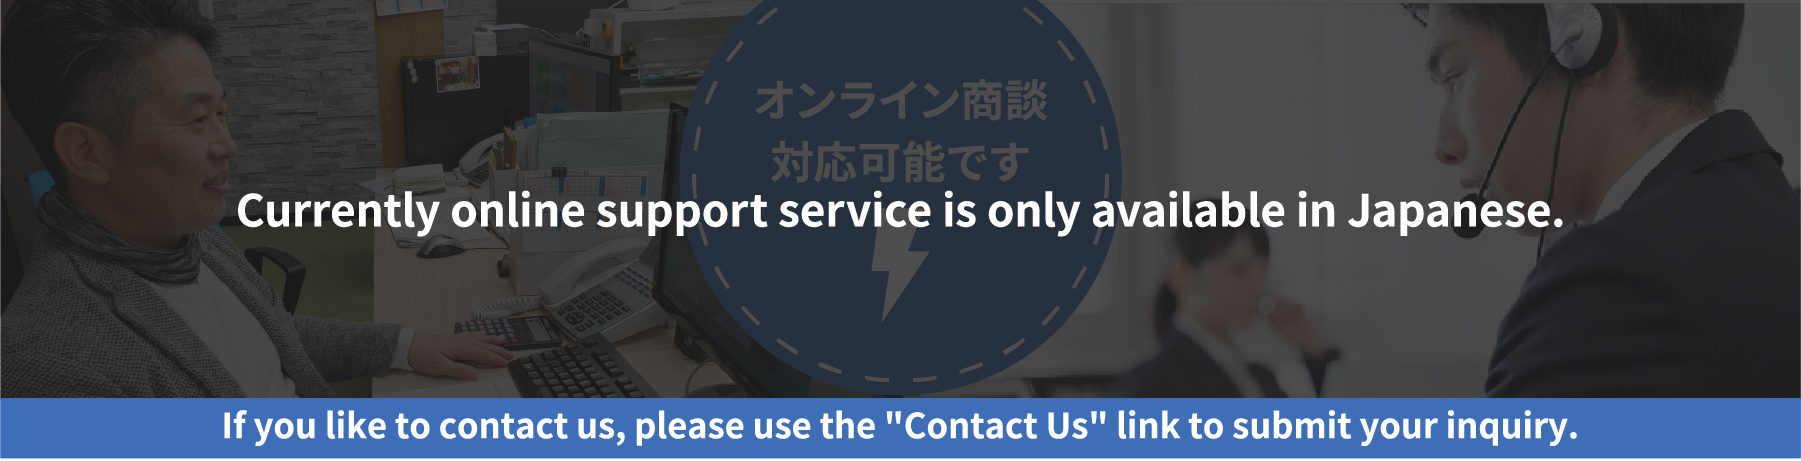 Currently online support service is only avaliable in Japanese. If you like to contact us, please use the 